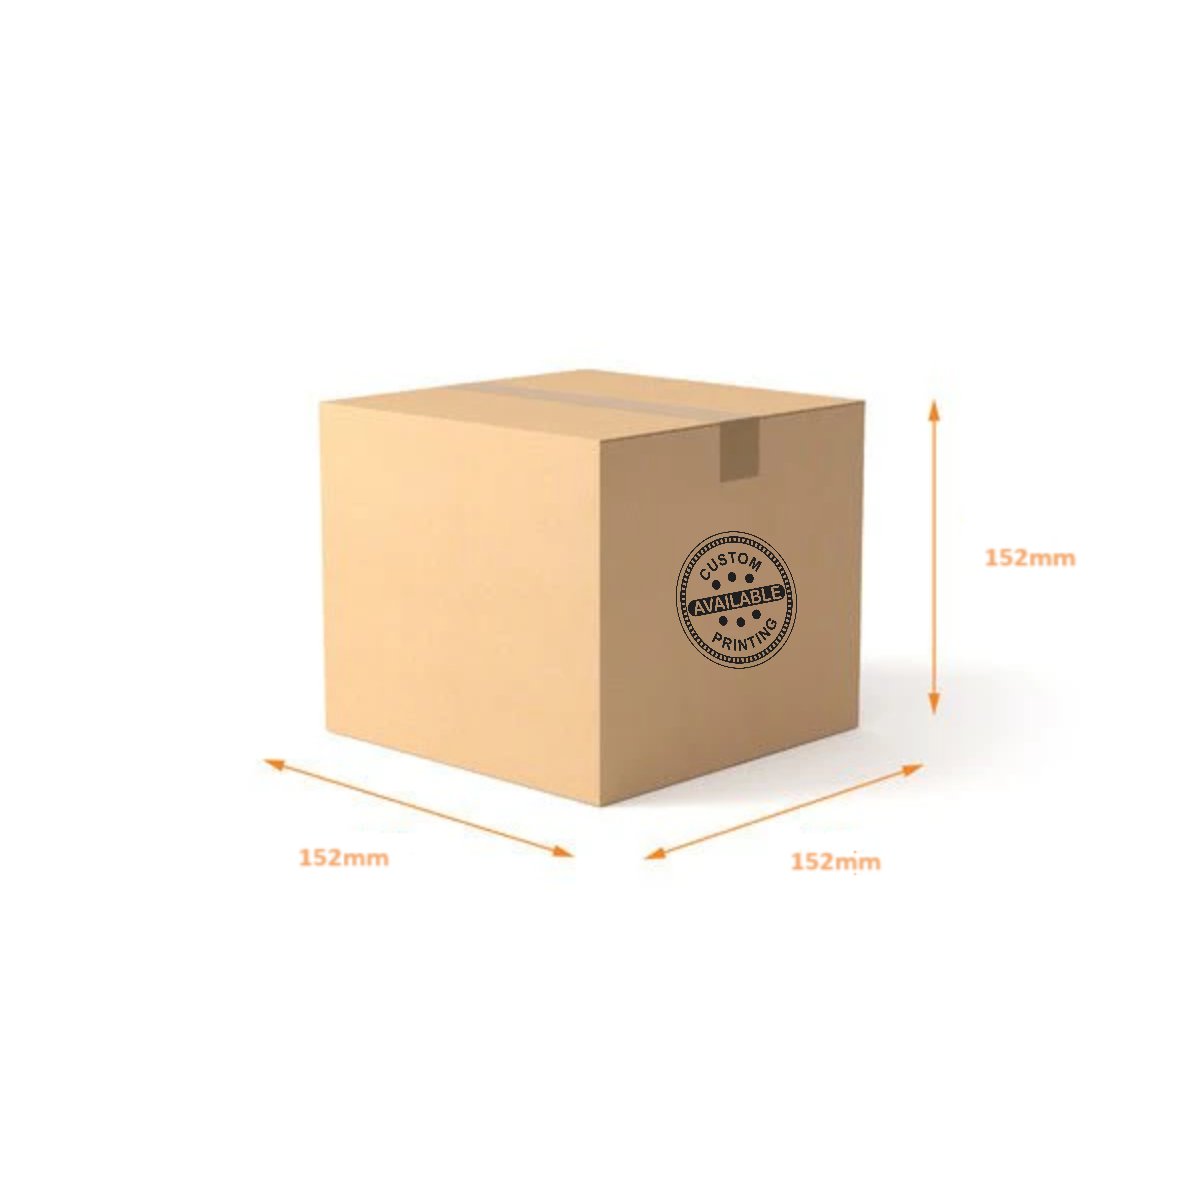 RSC Shipping Carton 152mm Cube - 100% Recyclable - PackQueen